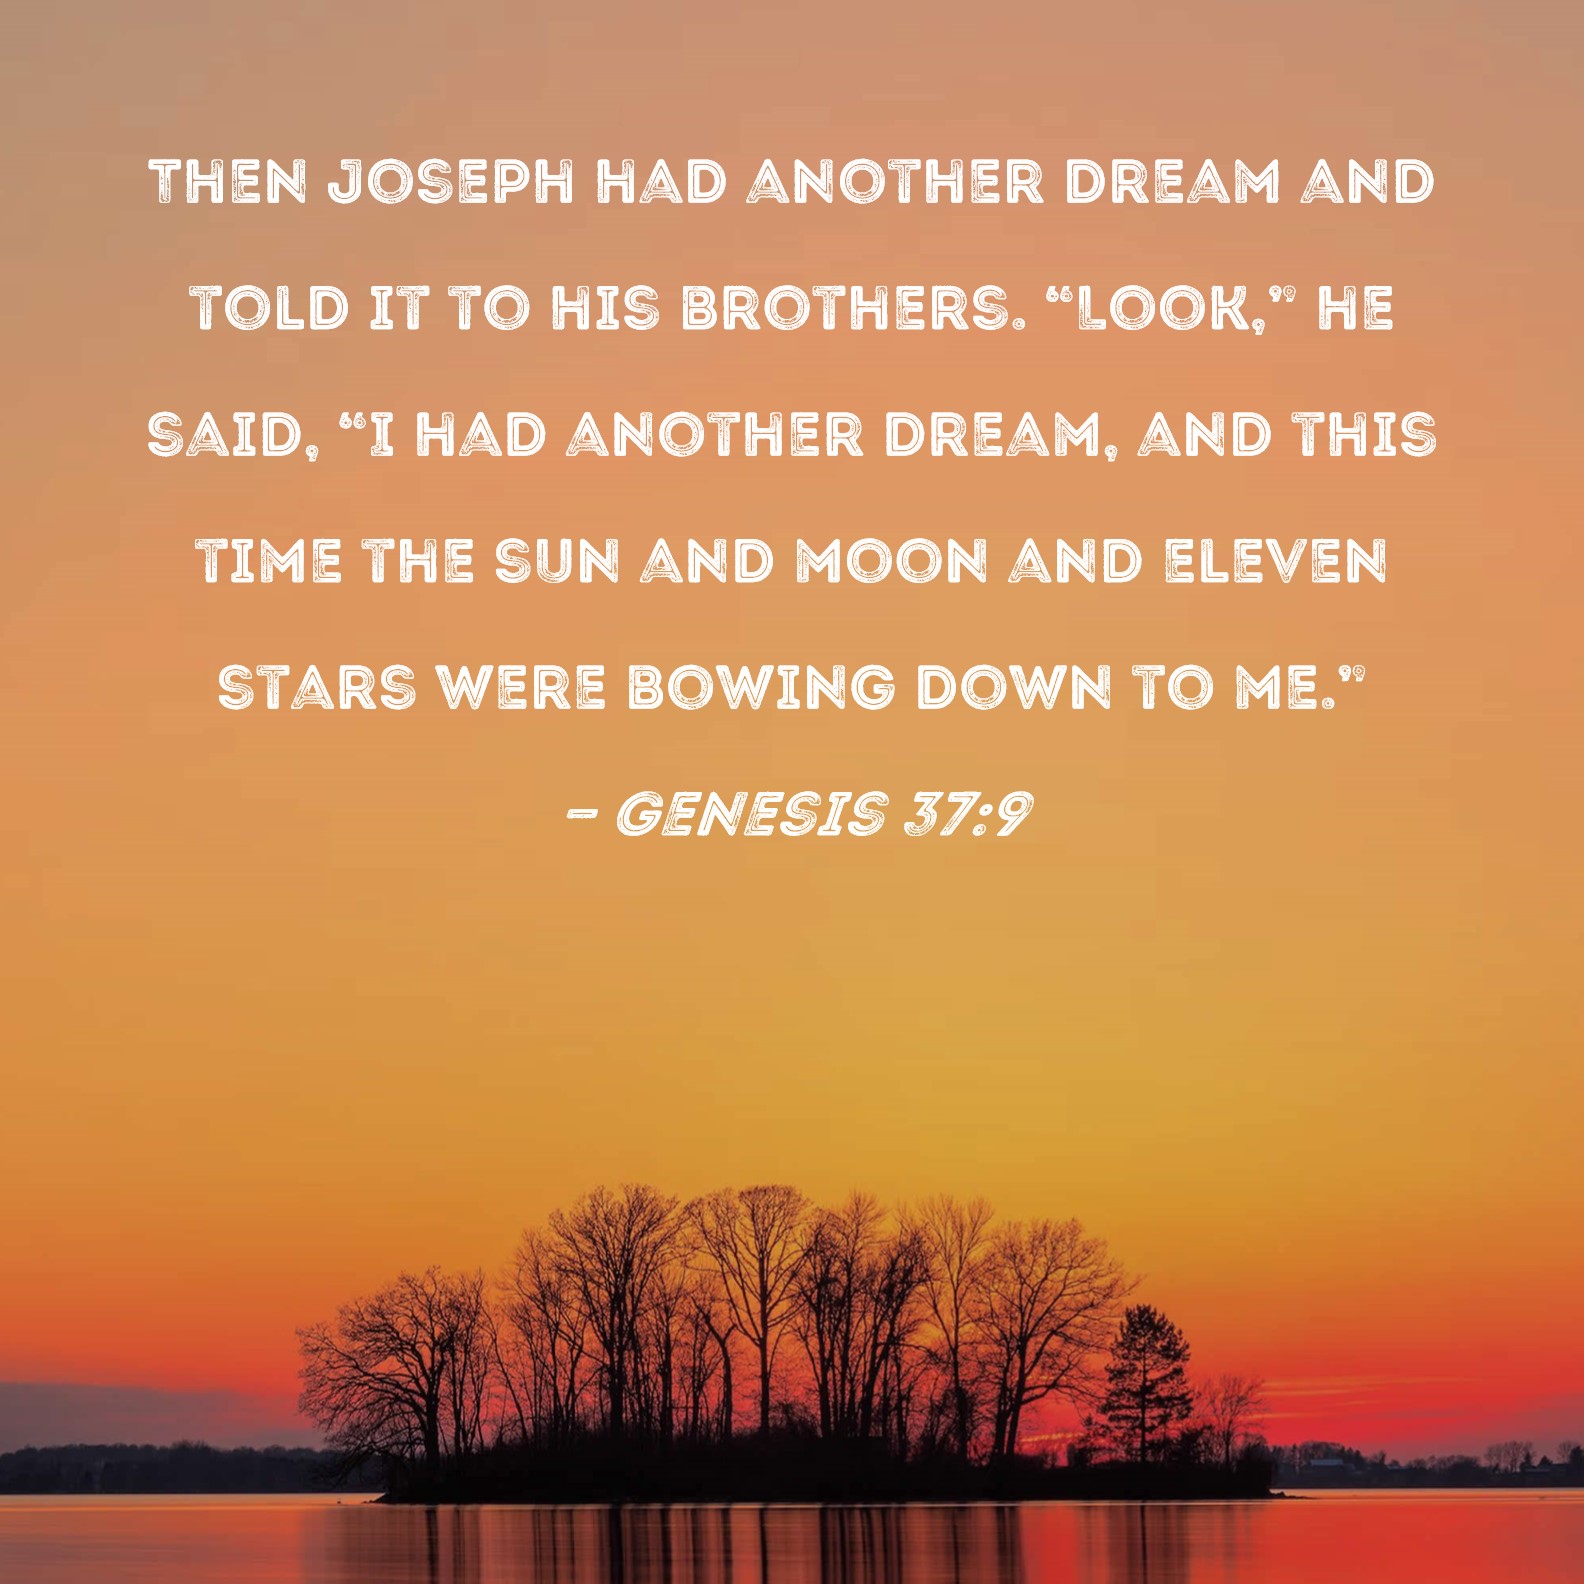 genesis-37-9-then-joseph-had-another-dream-and-told-it-to-his-brothers